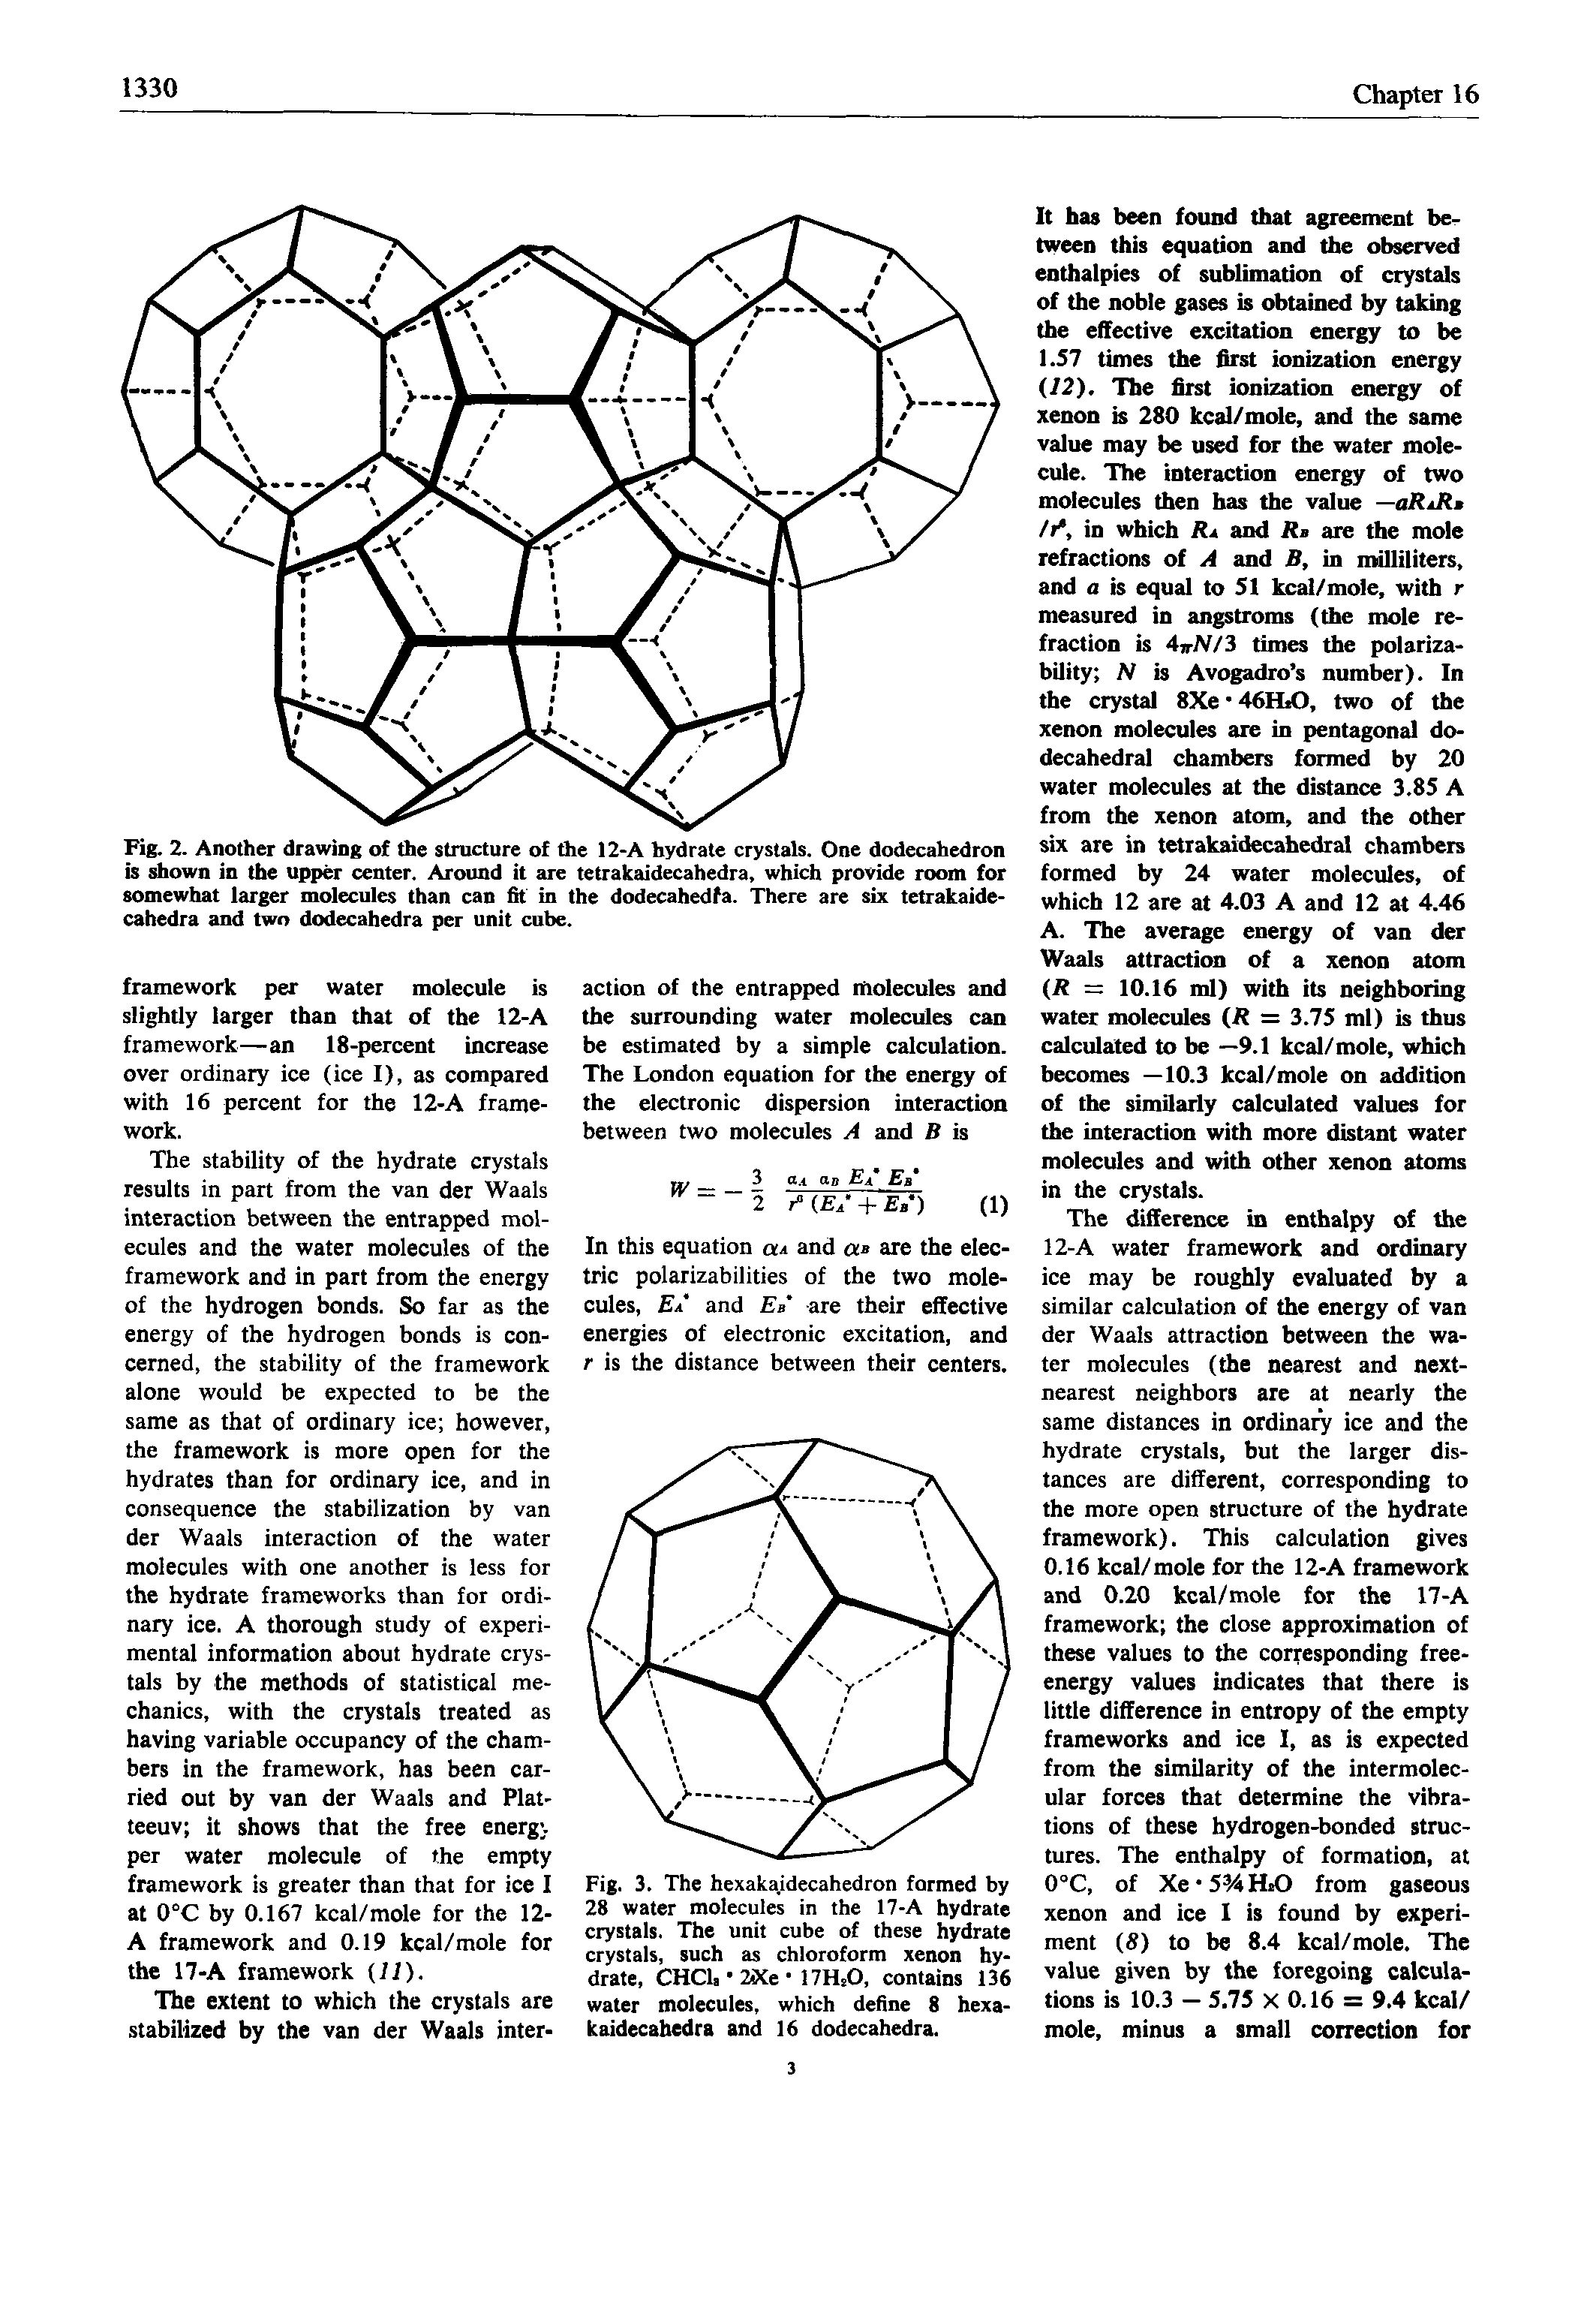 Fig. 3. The hexaka.idecahedron farmed by 28 water molecules in the 17-A hydrate crystals. The unit cube of these hydrate crystals, such as chloroform xenon hydrate, CHCla 29Ce 17HsO, contains 136 water molecules, which define 8 hexa-kaidecabedra and 16 dodecahedra.